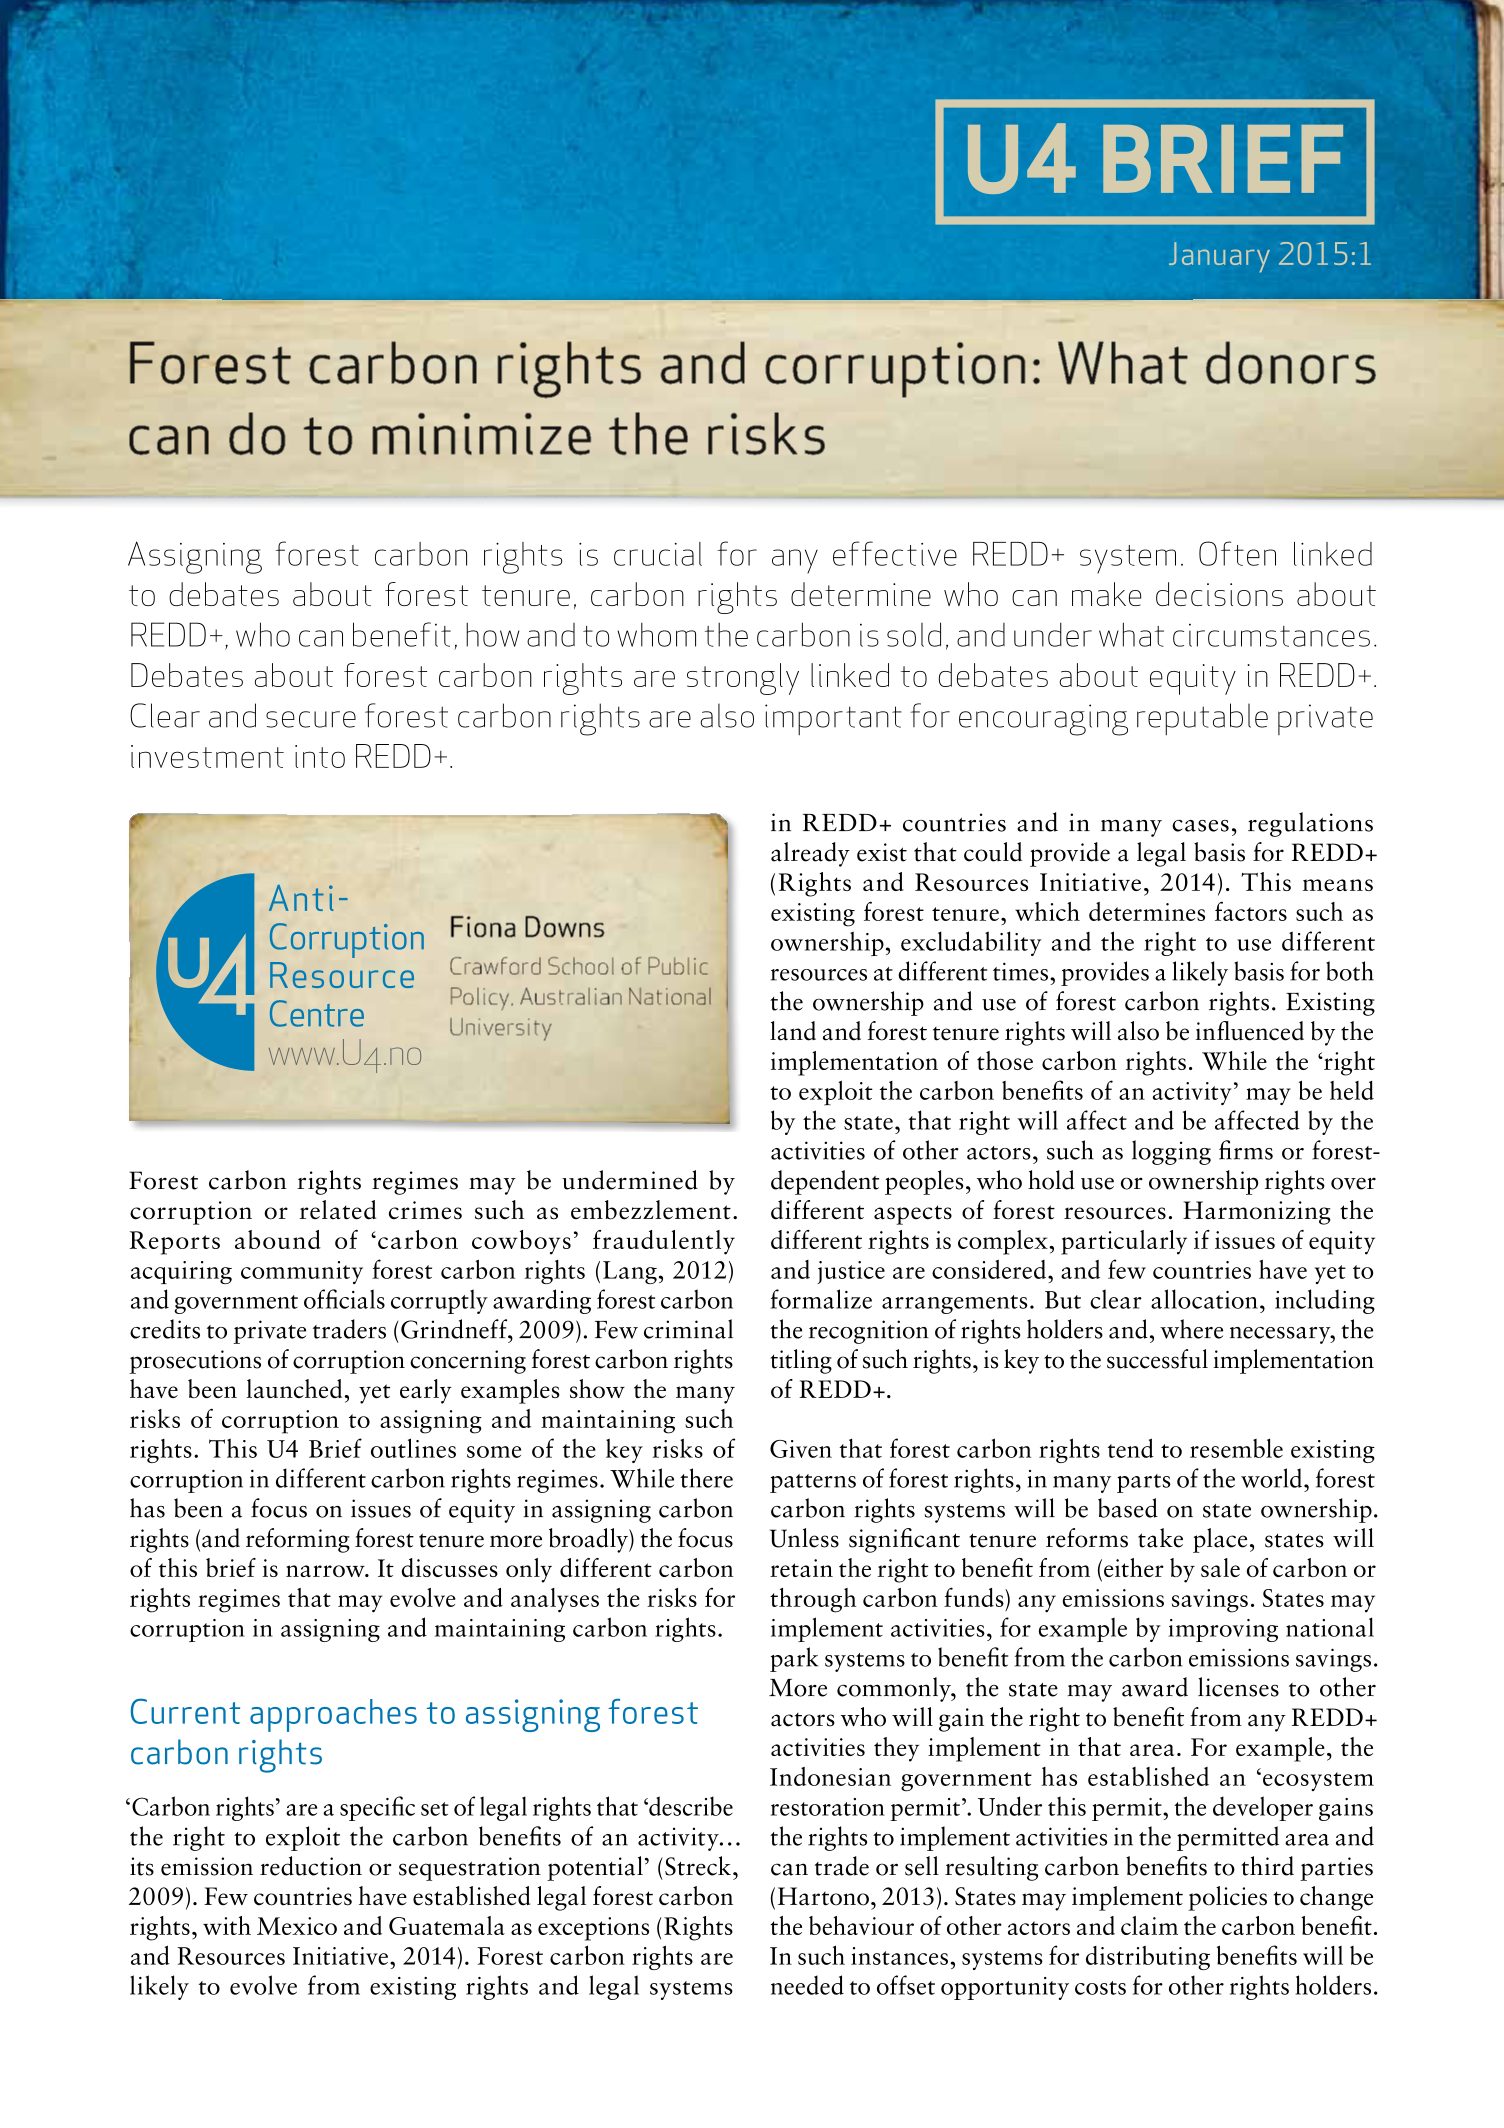 Forest carbon rights and corruption: What donors can do to minimize the risks